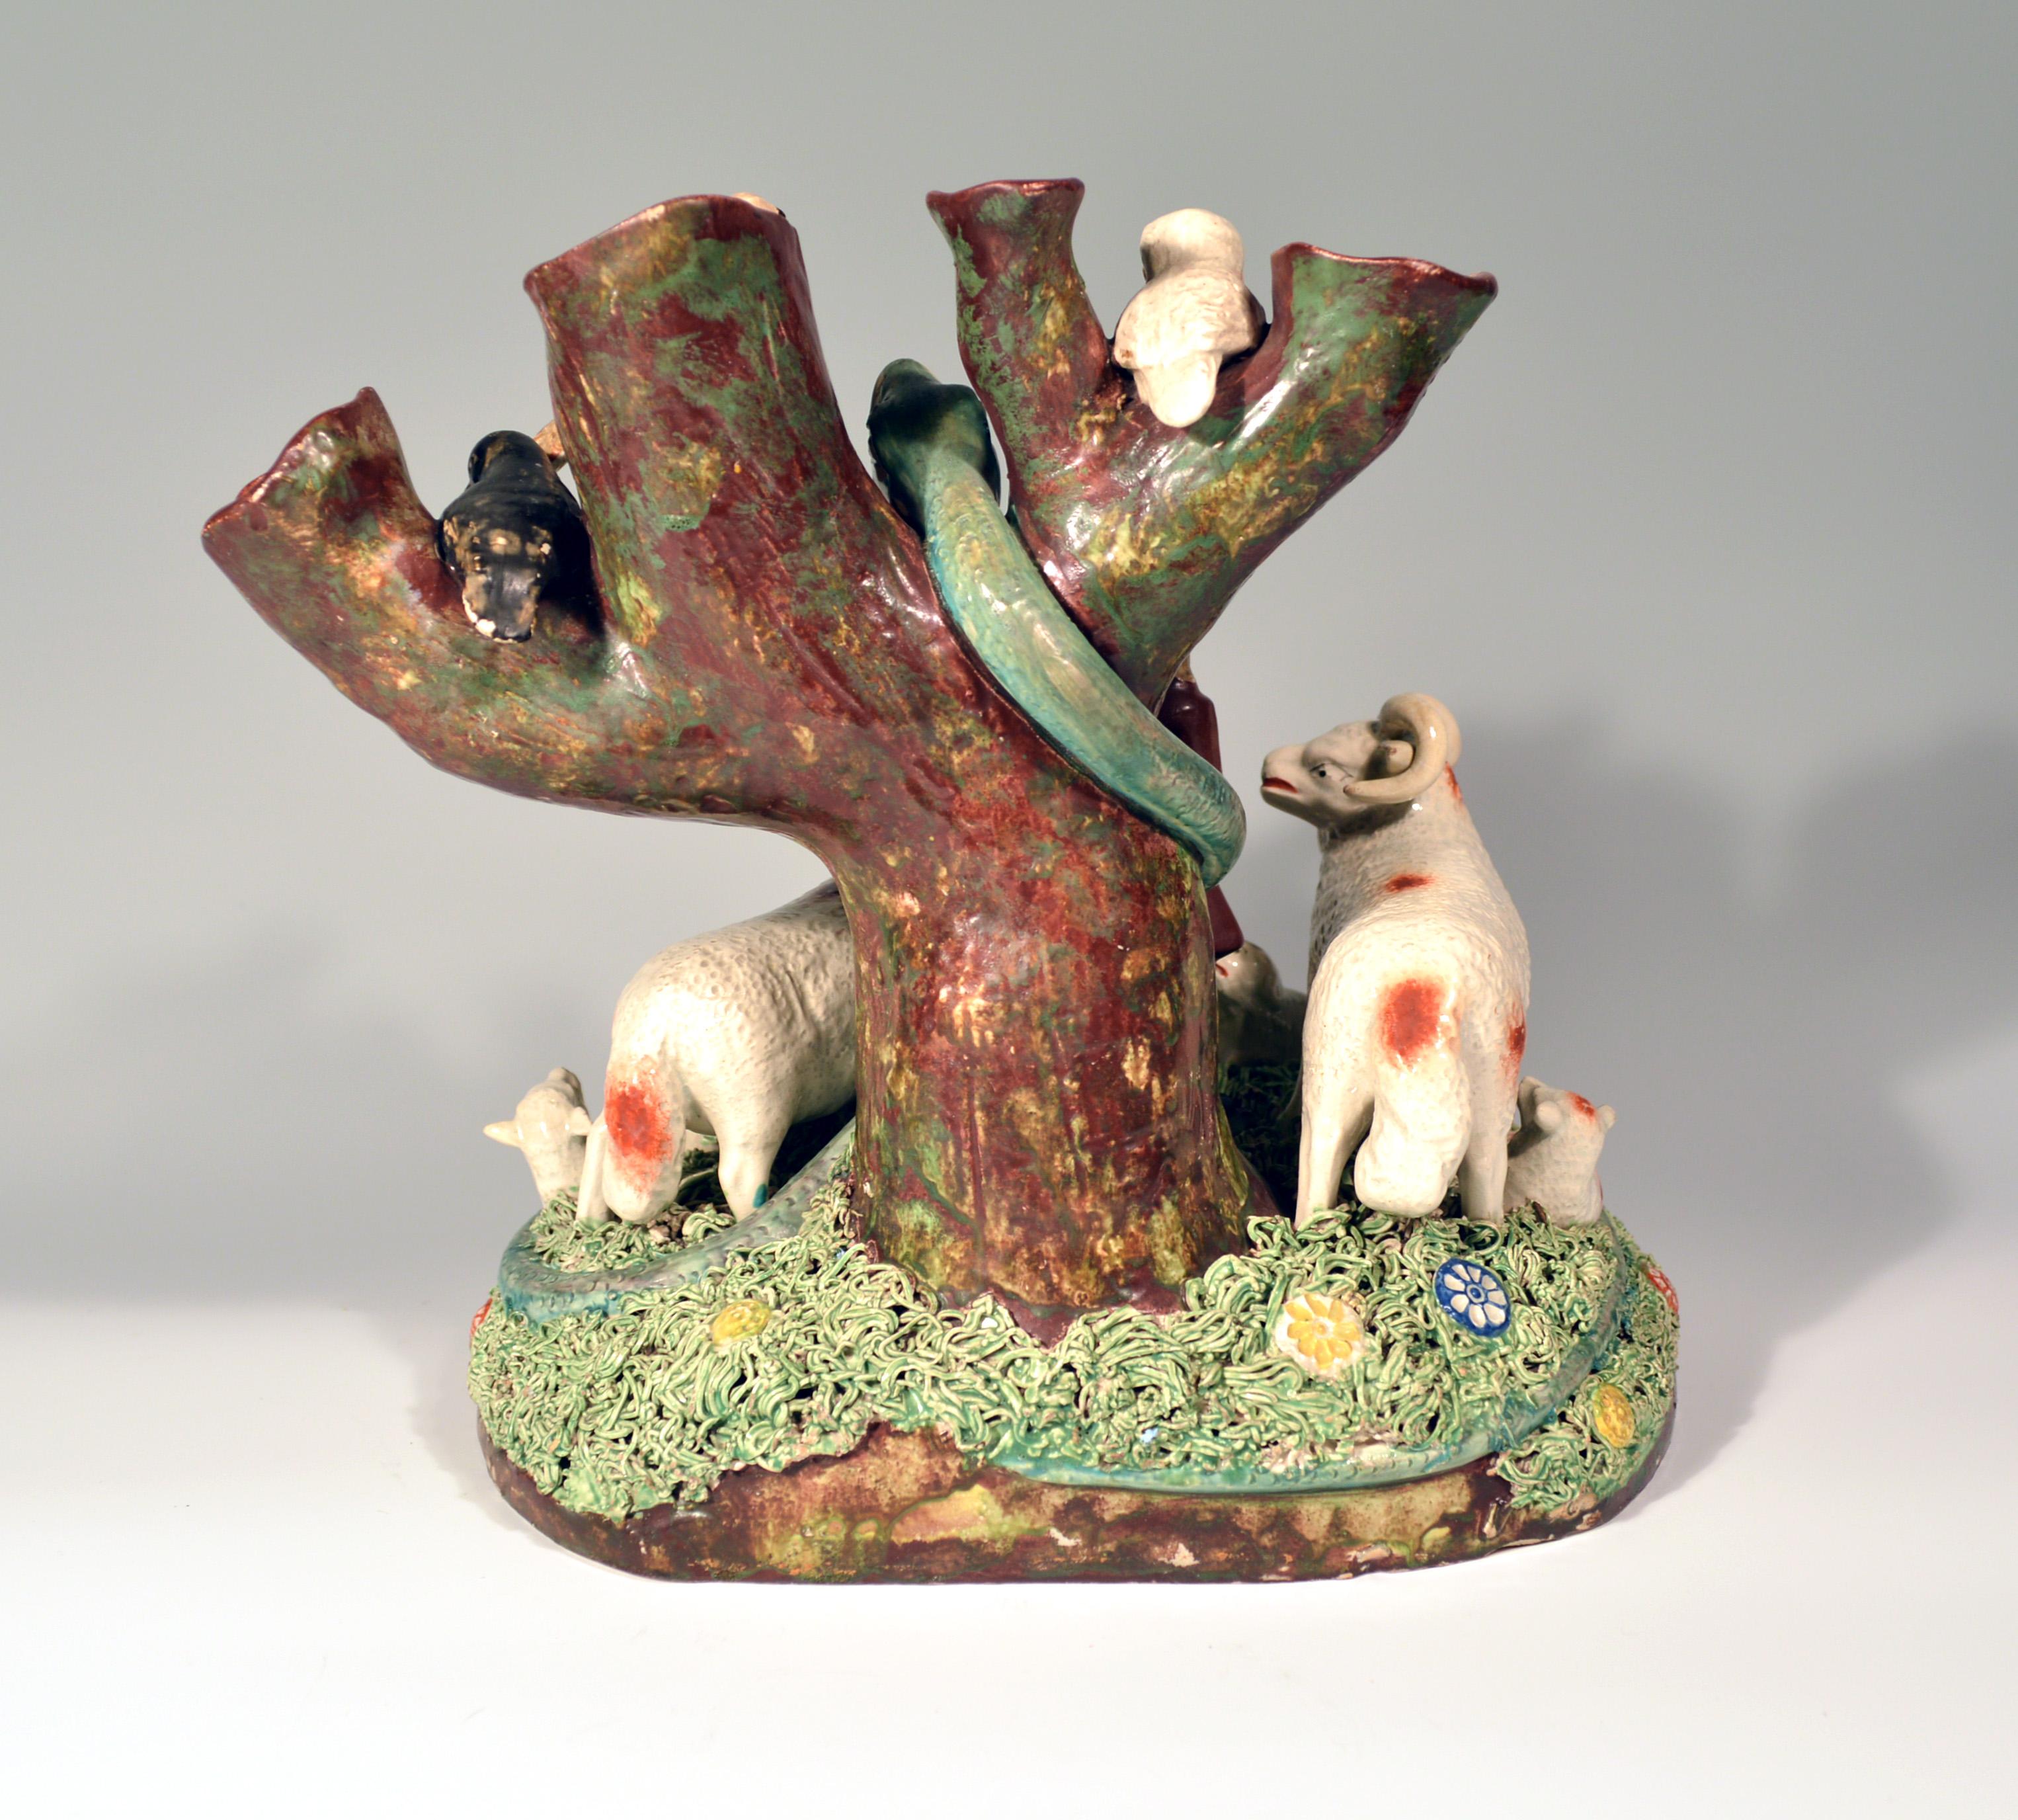 19th Century Staffordshire Pearlware Rare Pottery Group of Shepherd and Herd of Sheep, 1825